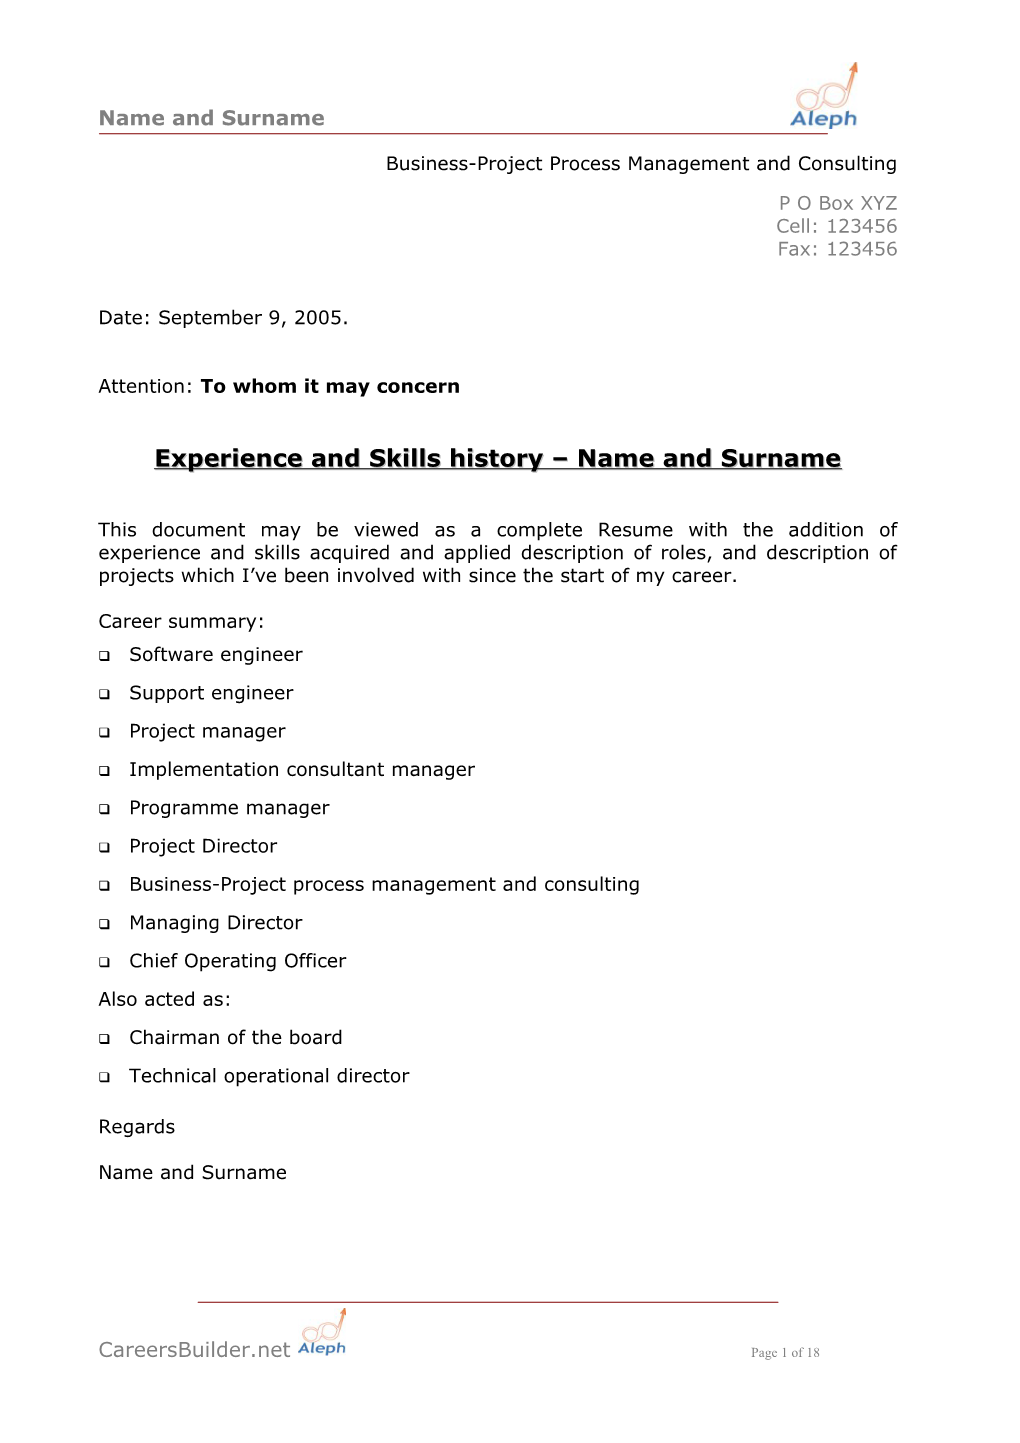 Experience and Skills History Name and Surname